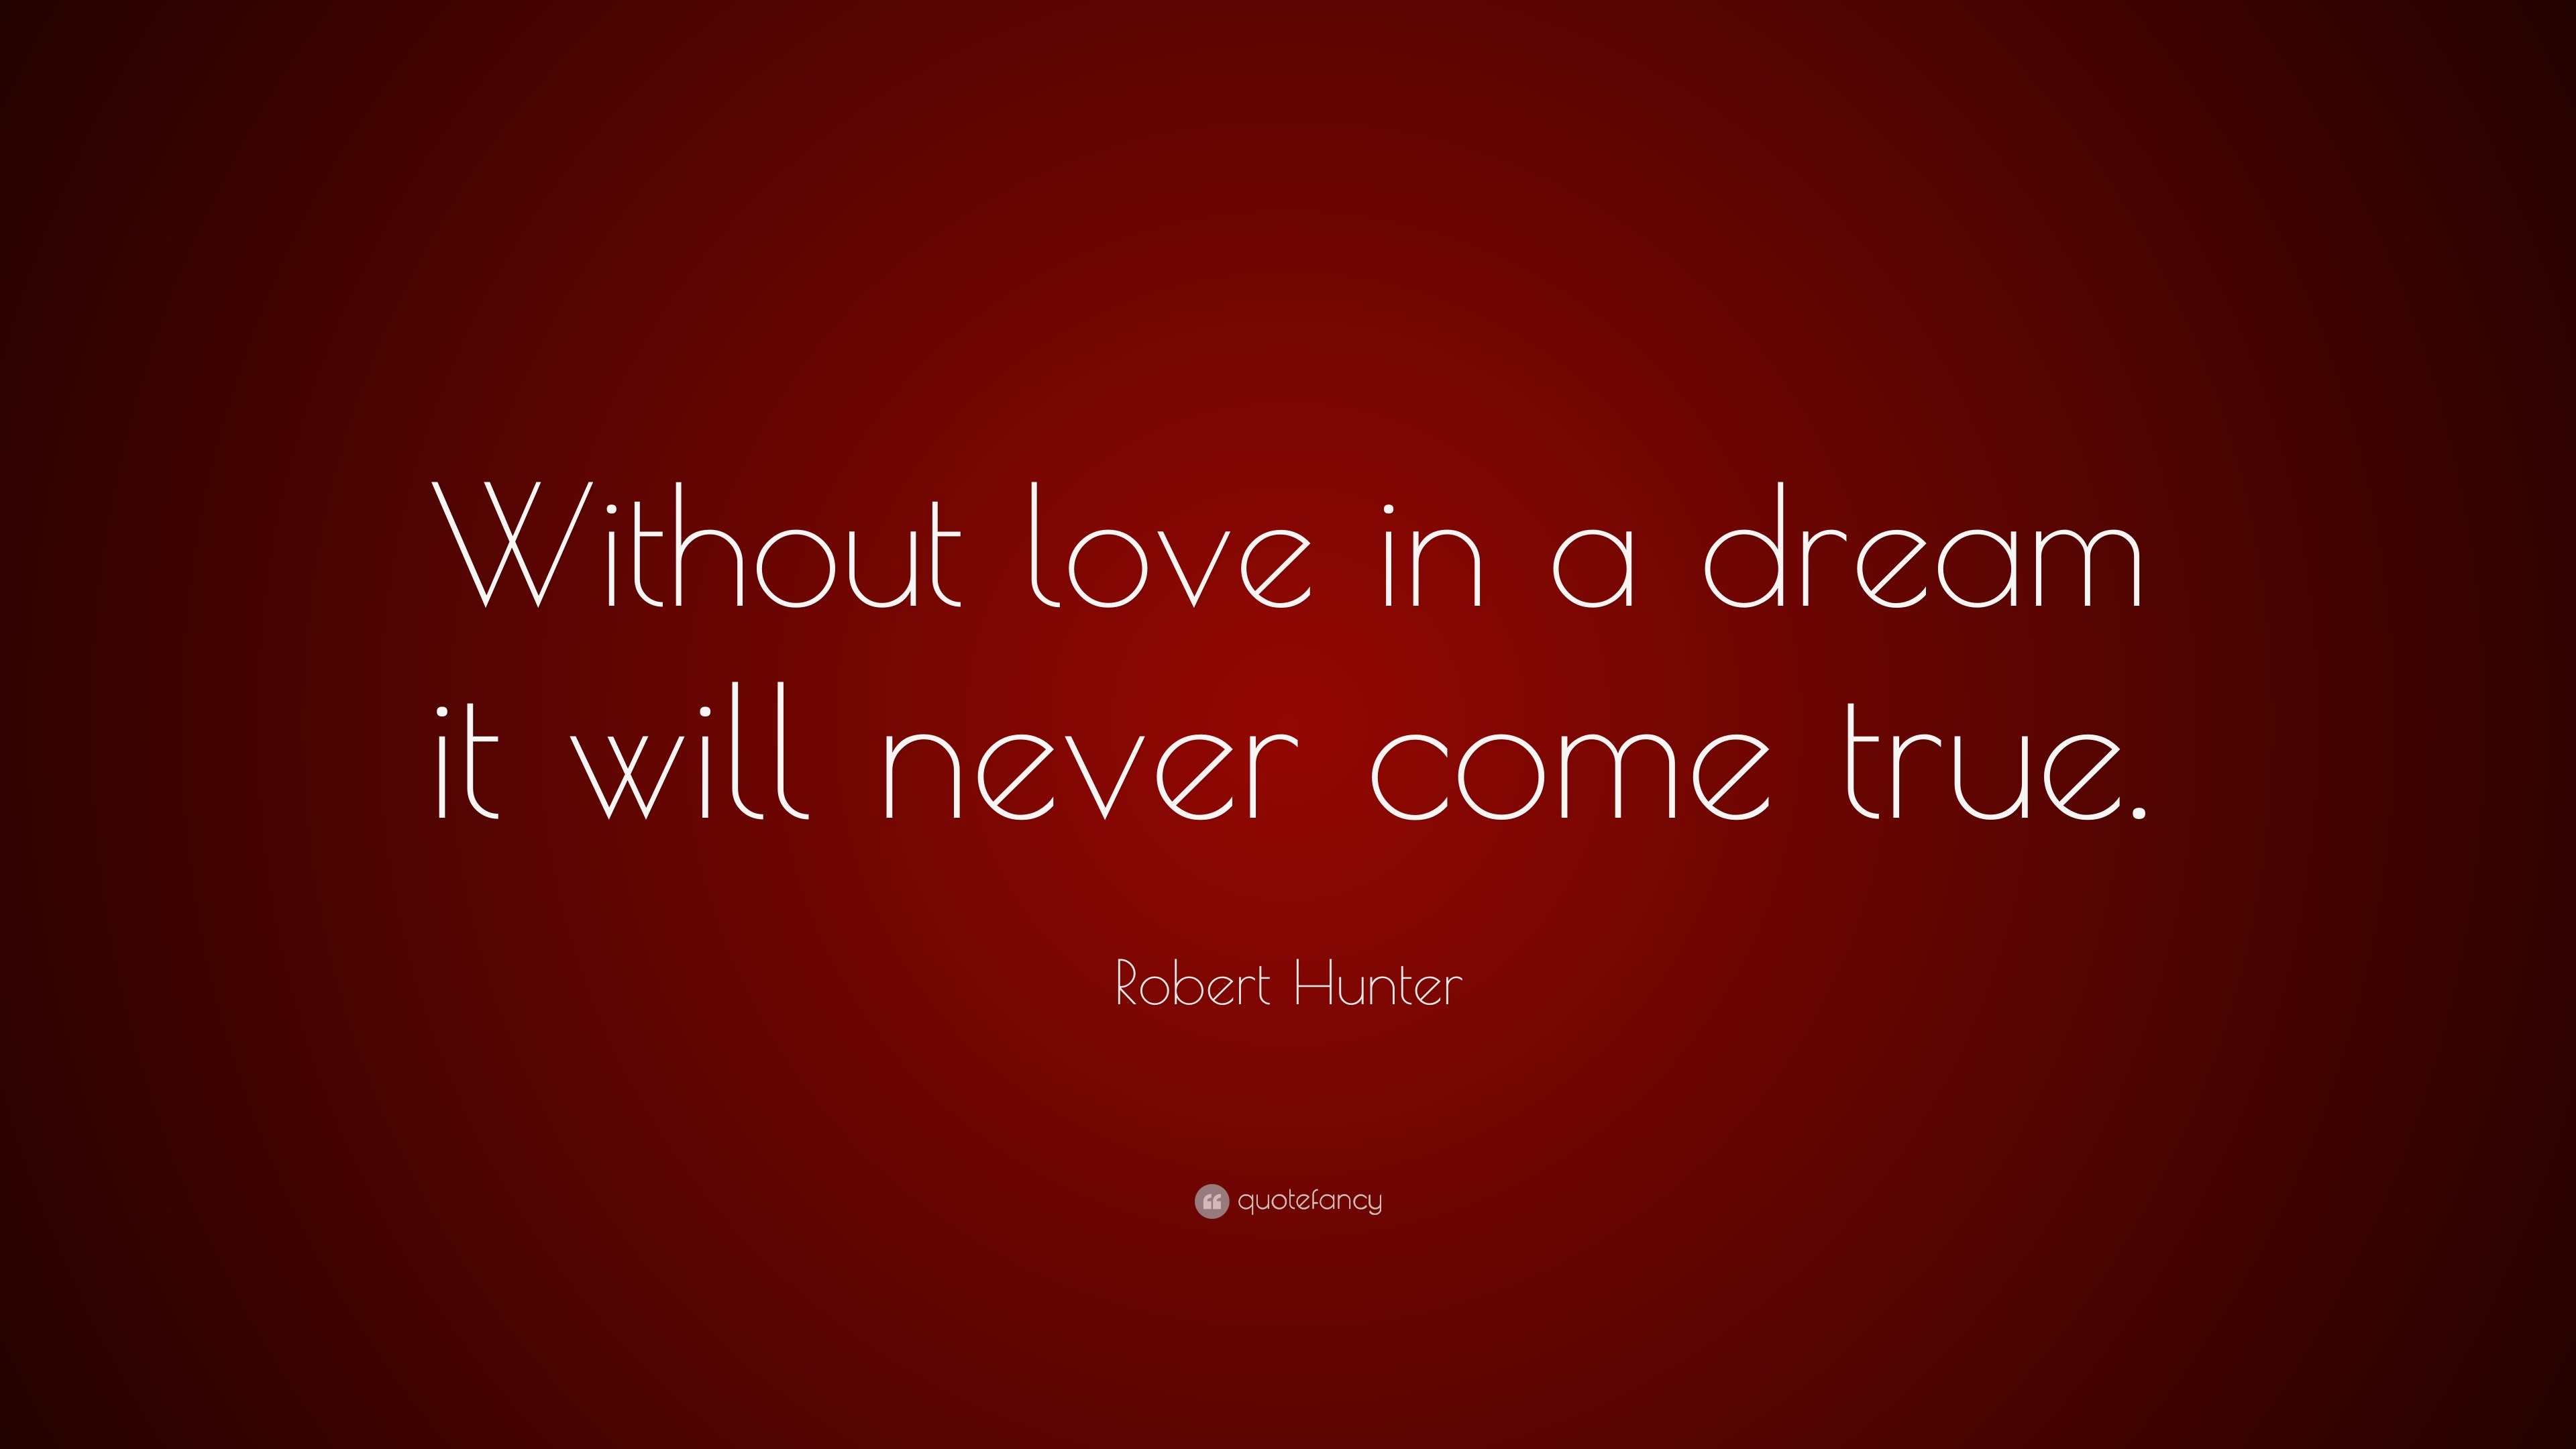 Best Of Quotes About Dreams Coming True Love | Thousands of Inspiration